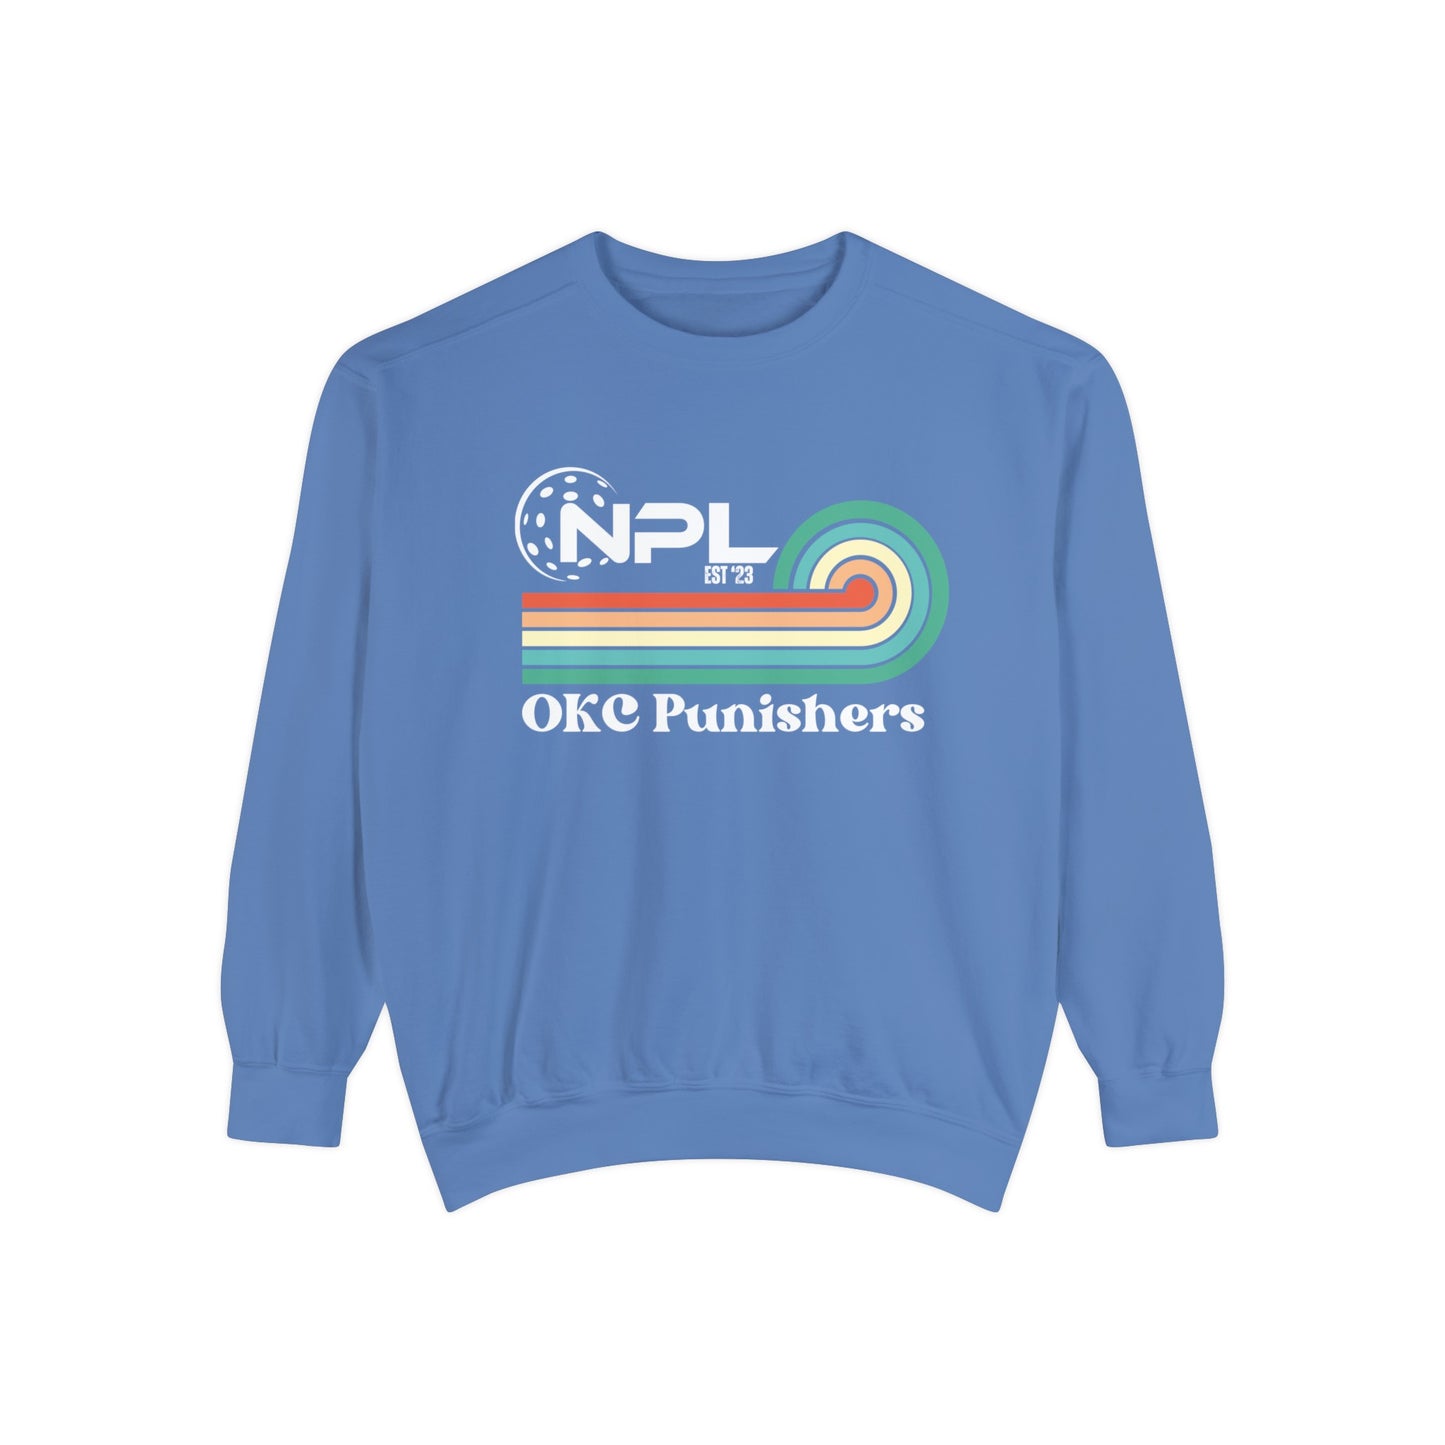 NPL Retro Crew OKC Punishers - can add your name to back or team name